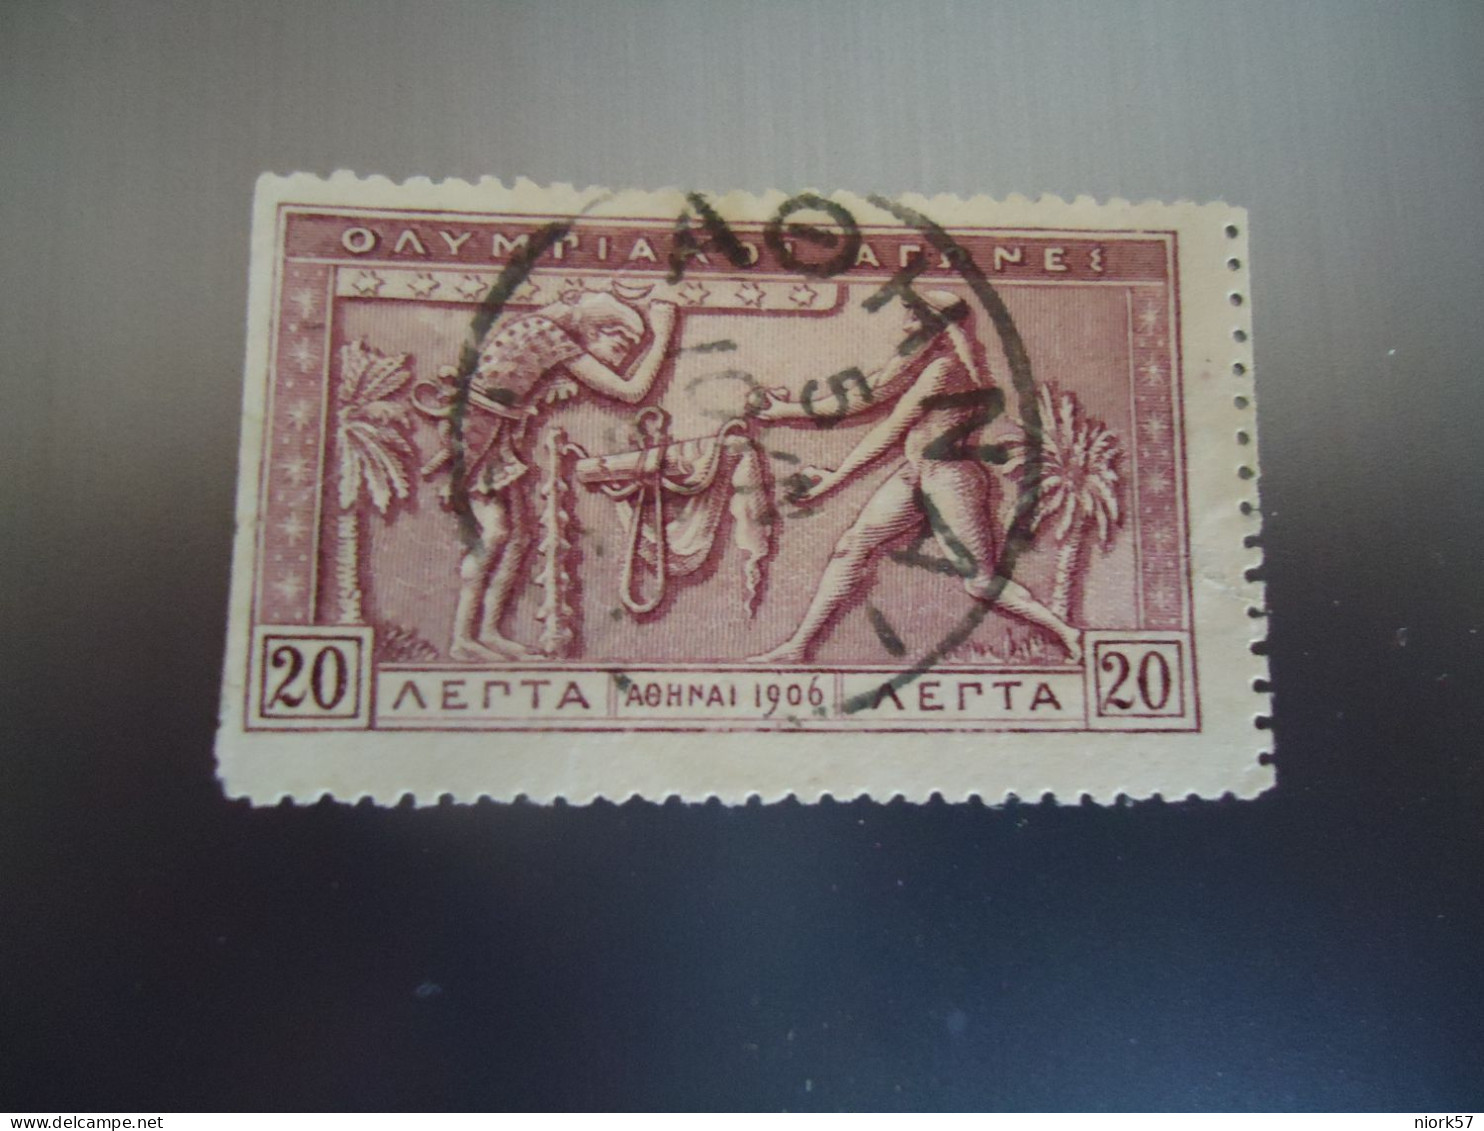 GREECE USED STAMPS OLYMPIC GAMES 1906   POSΤMARK  ΑΘΗΝΑ - Marcofilie - EMA (Printer)